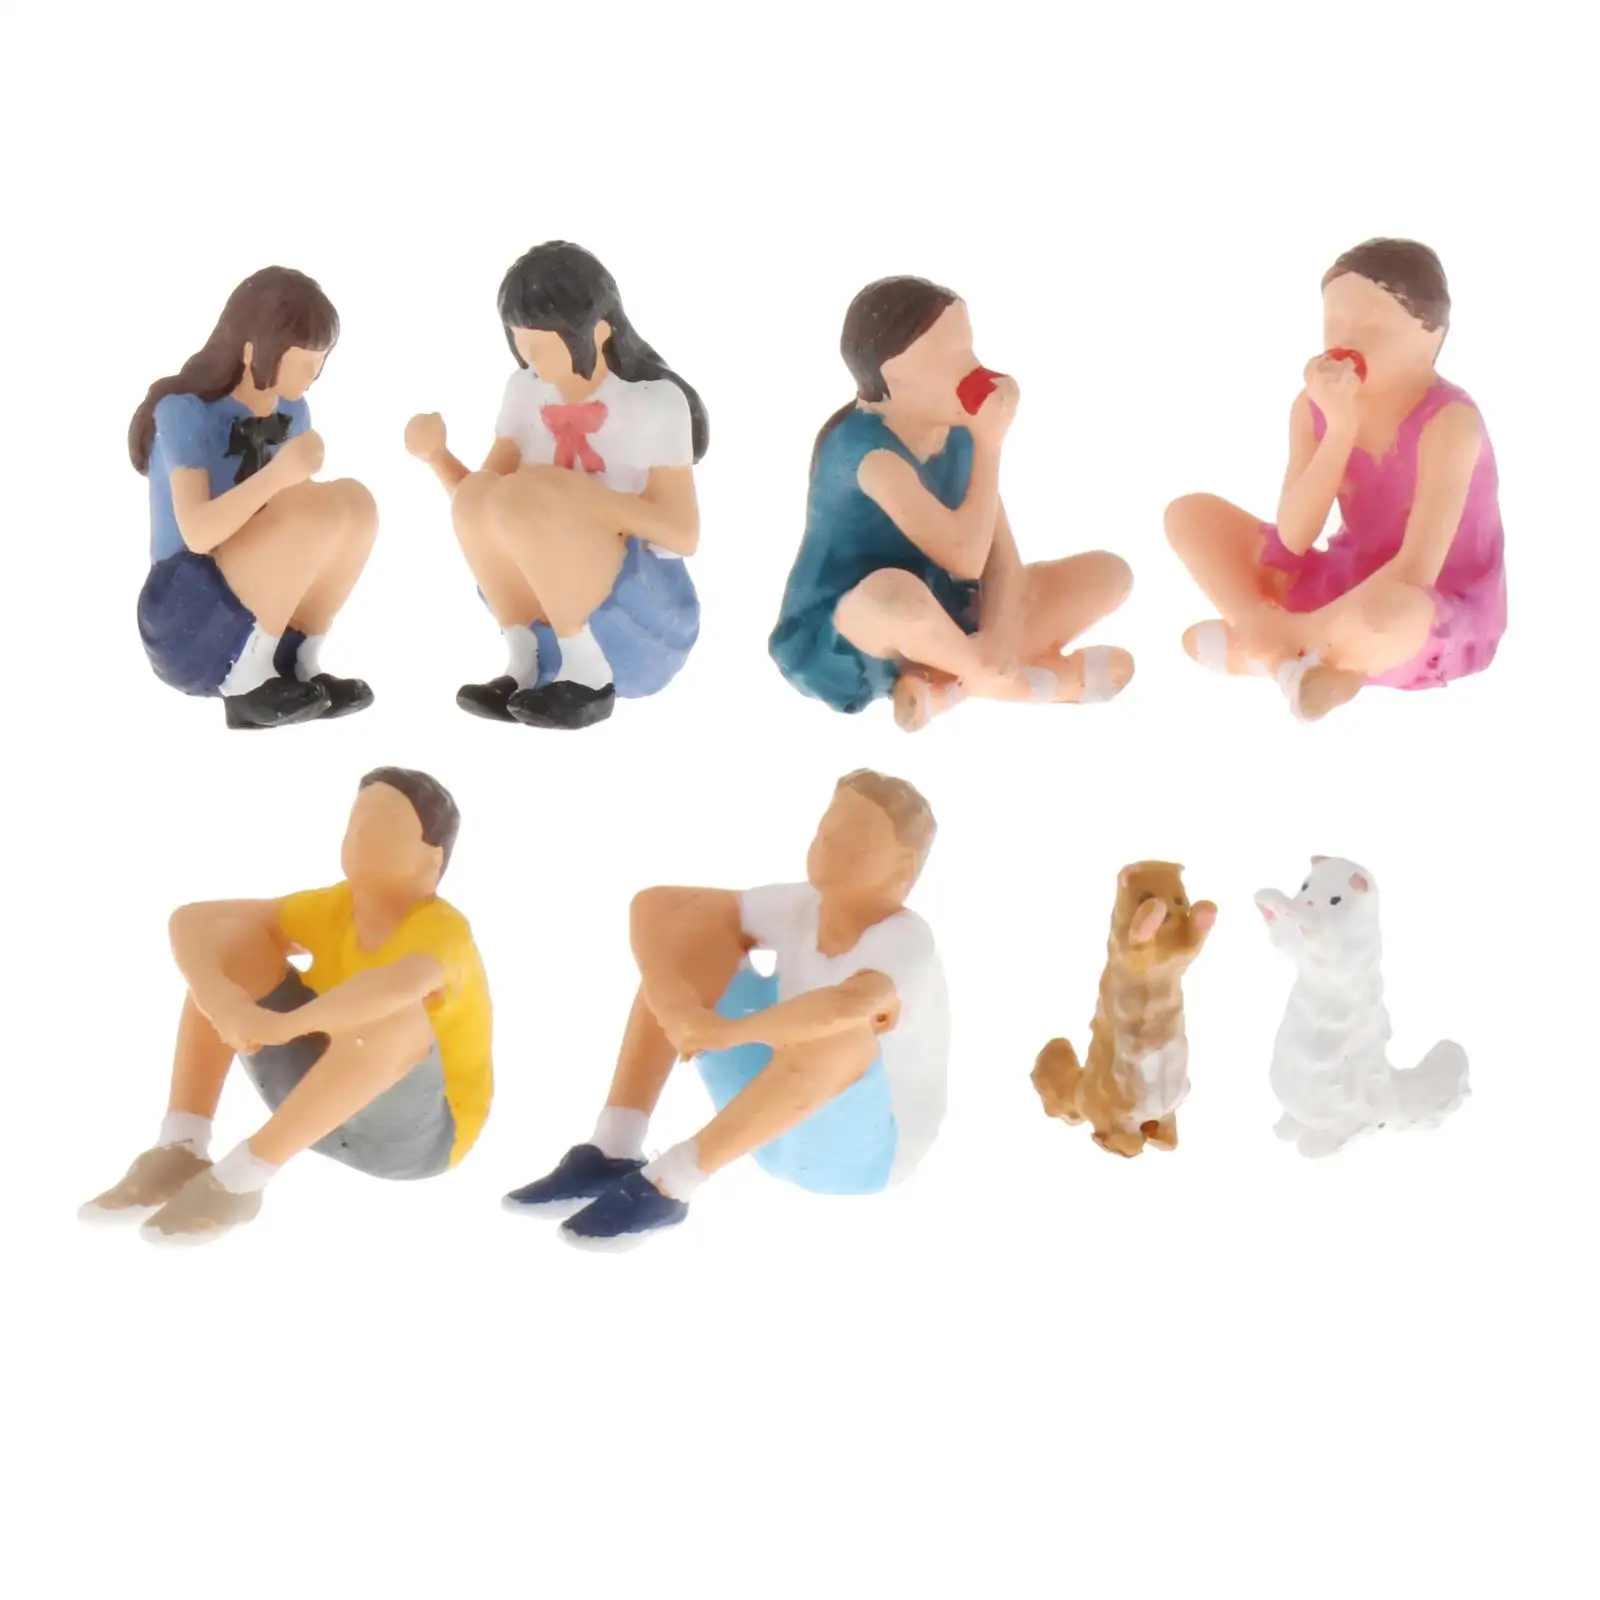 People Action Figures 1:64 Scale Model People Figures Small People Sitting And Crouching for Miniature Scenes